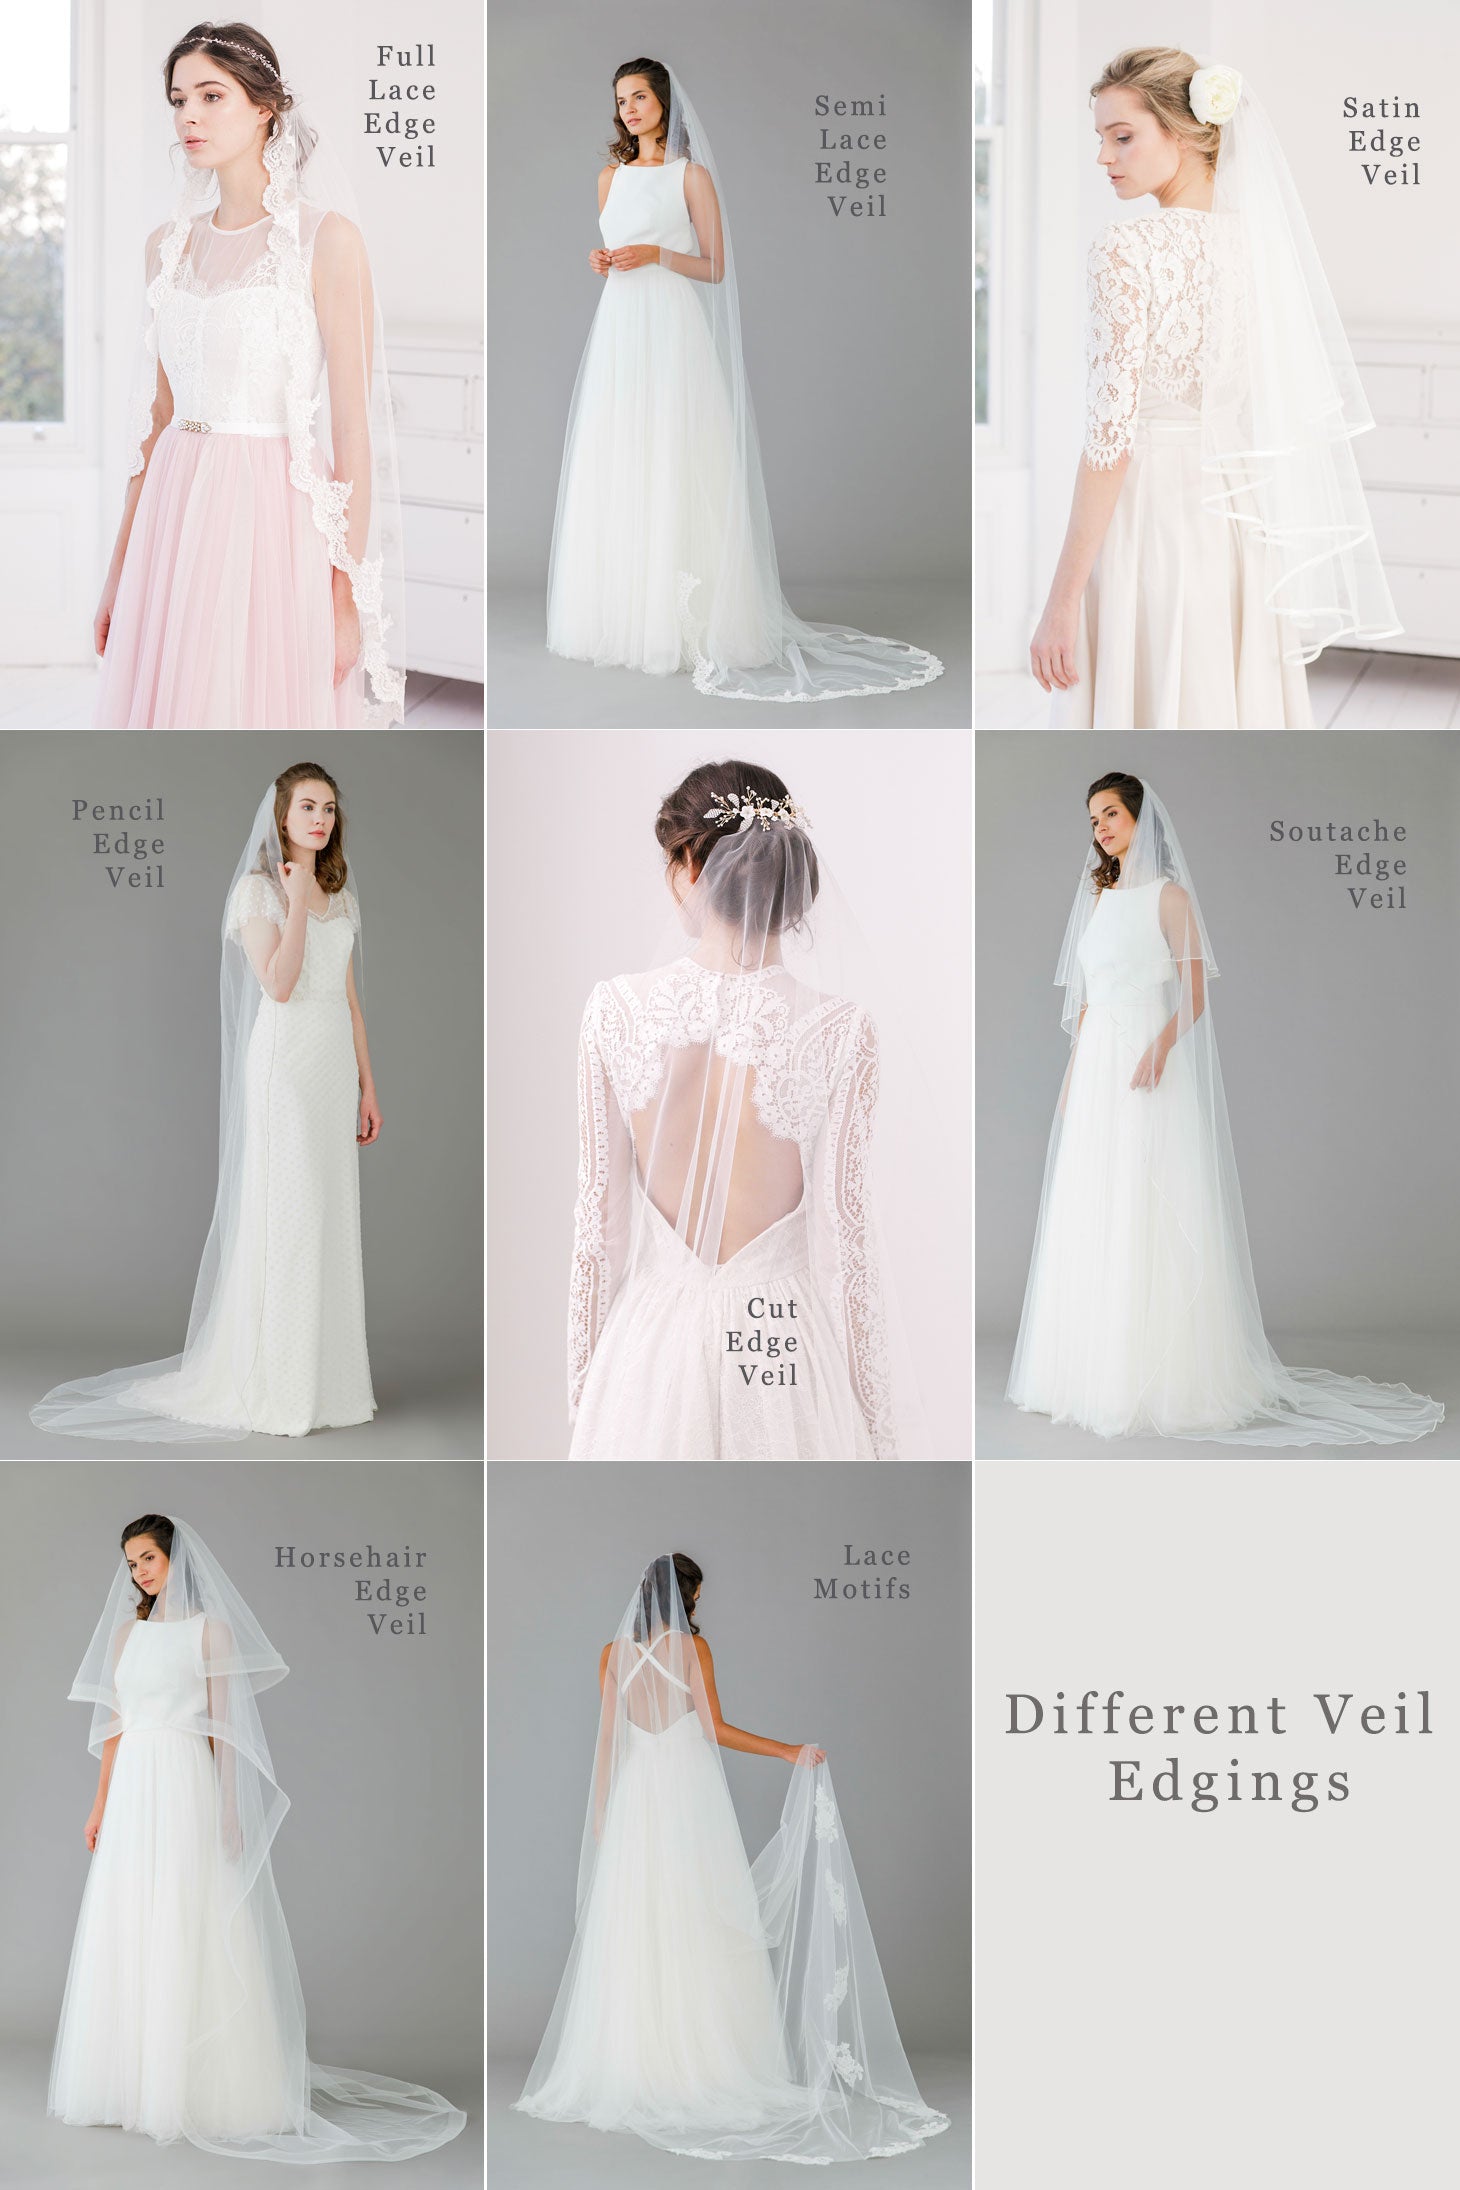 what are the different types of veil edgings available